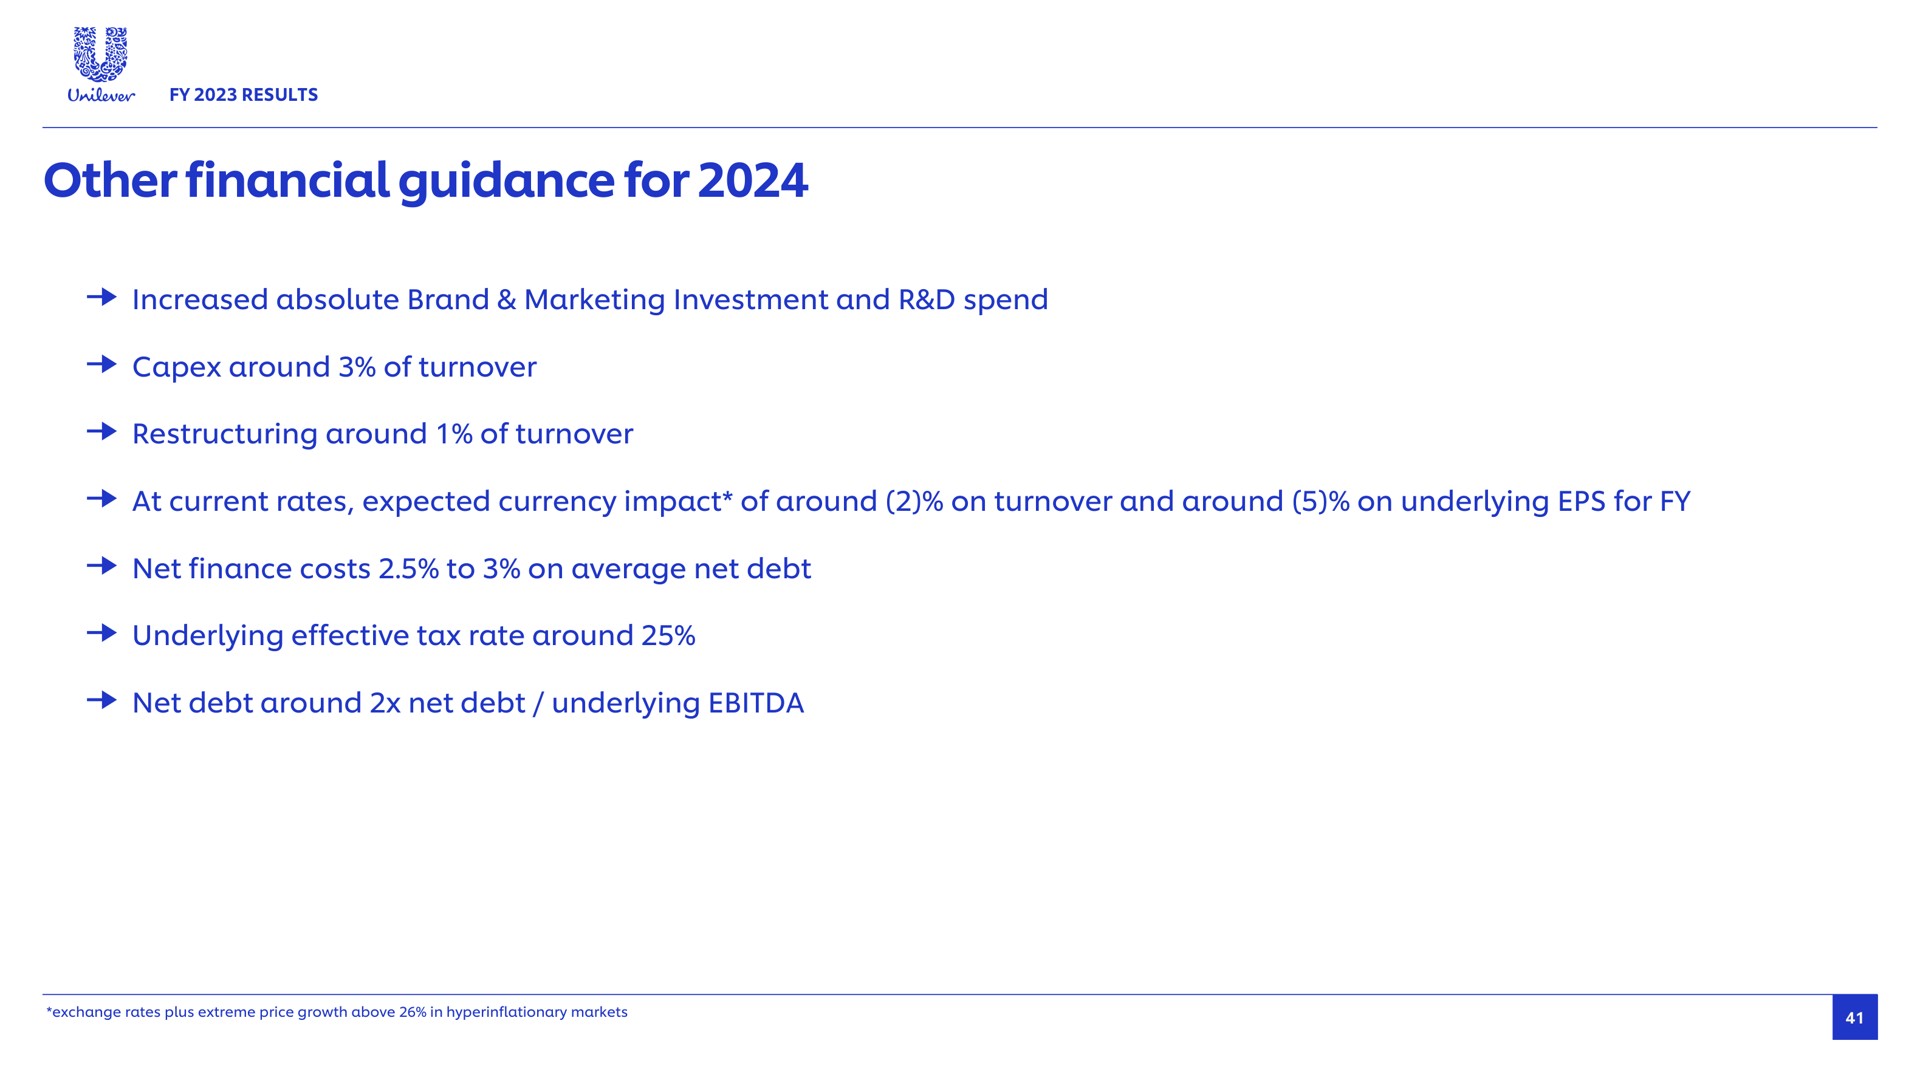 other financial guidance for increased absolute brand marketing investment and spend around of turnover around of turnover rates expected currency impact of around on turnover and around on underlying net finance costs to on average net debt underlying effective tax rate around net debt around net debt underlying | Unilever